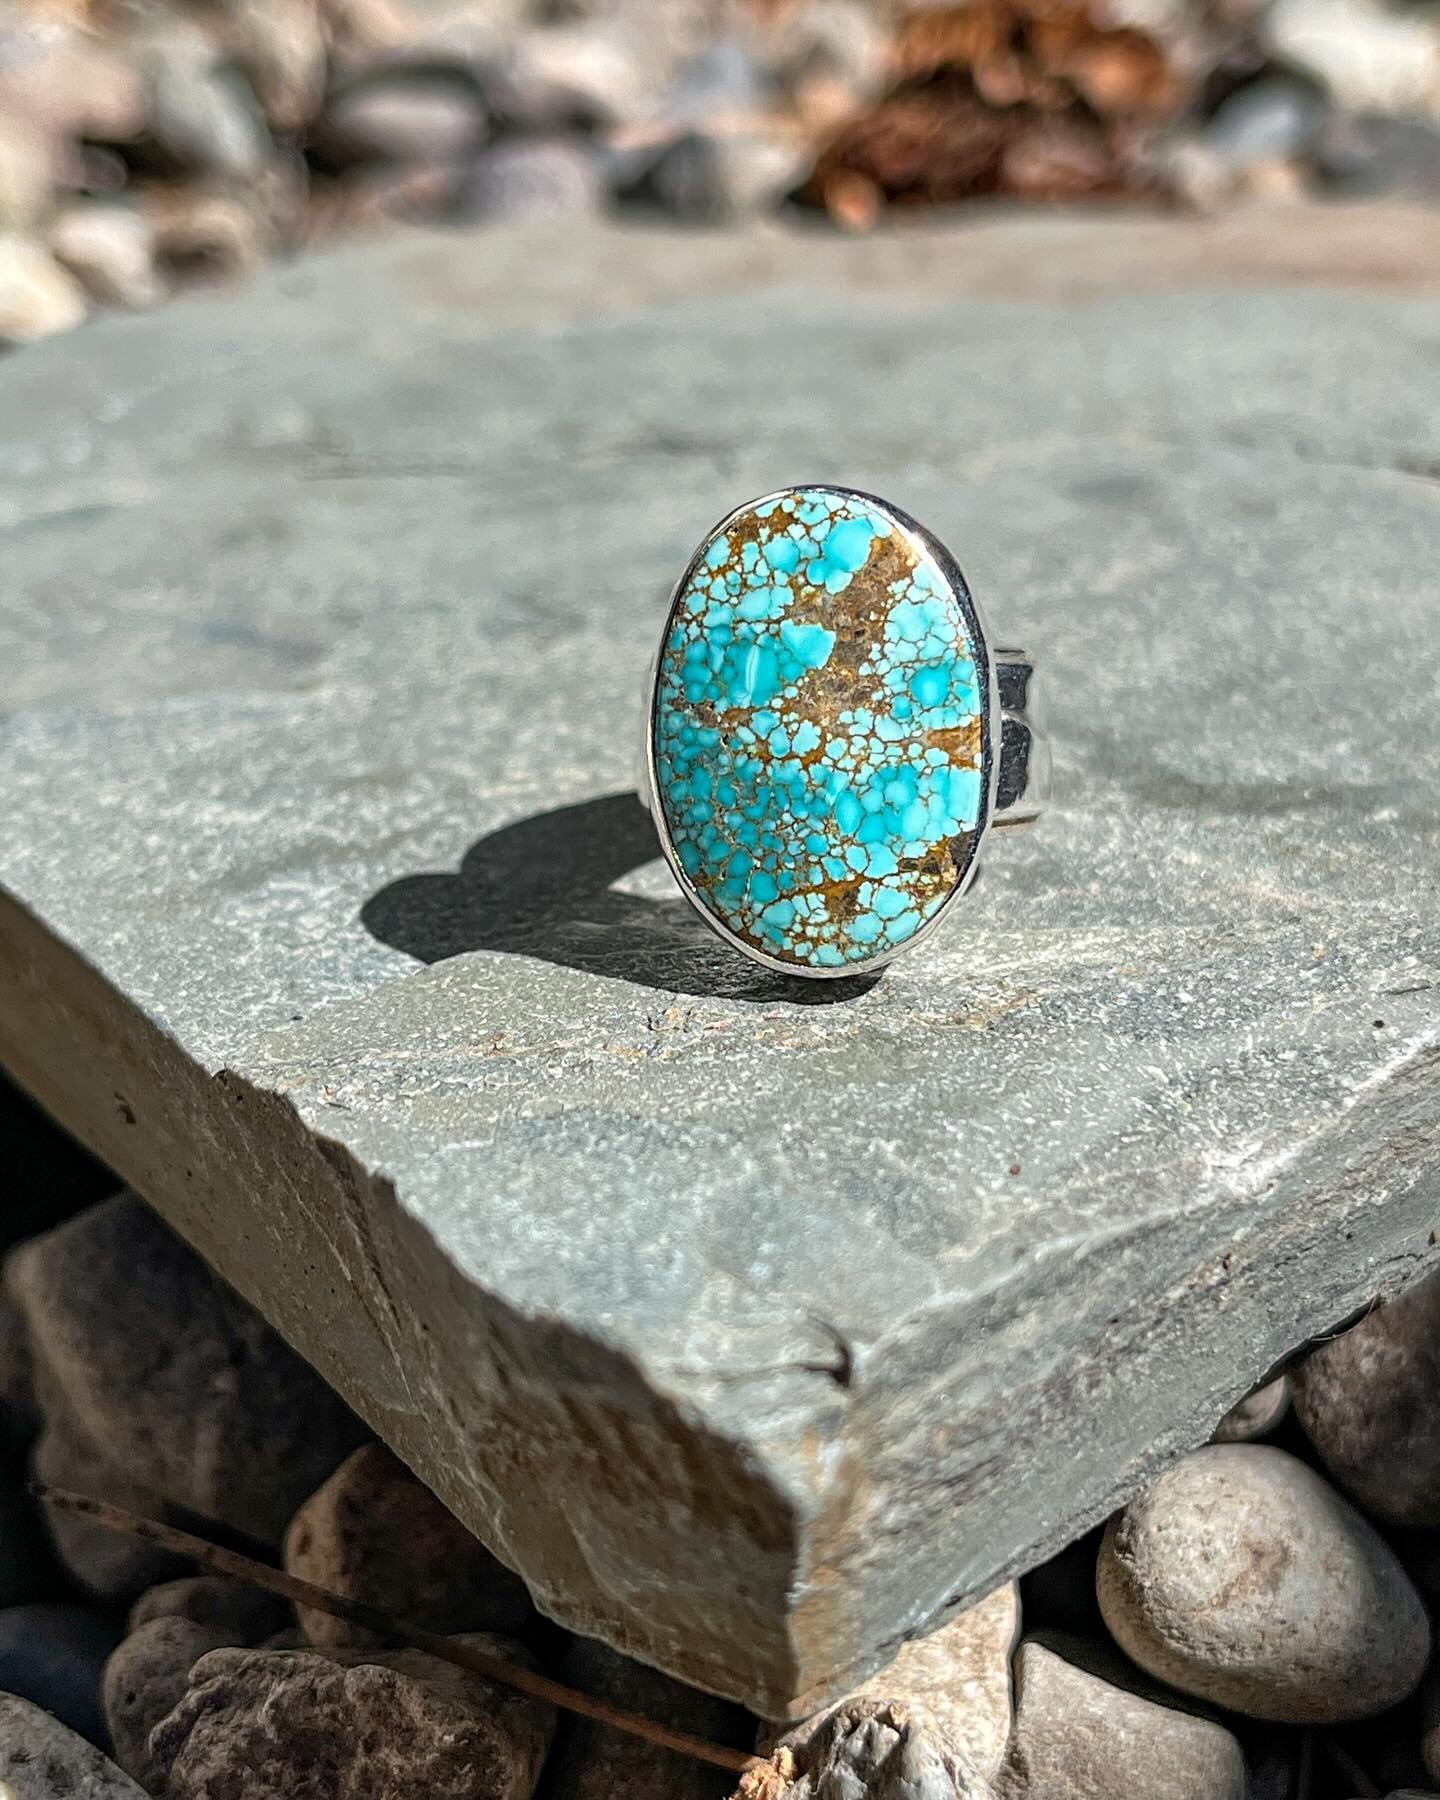 The first forms coming together //
.
This No. 8 mine turquoise ring is one of the first of many for a new collection called &ldquo;Unlocking&rdquo;, coming May 1st! 
.
Comment below on what you would love to see!